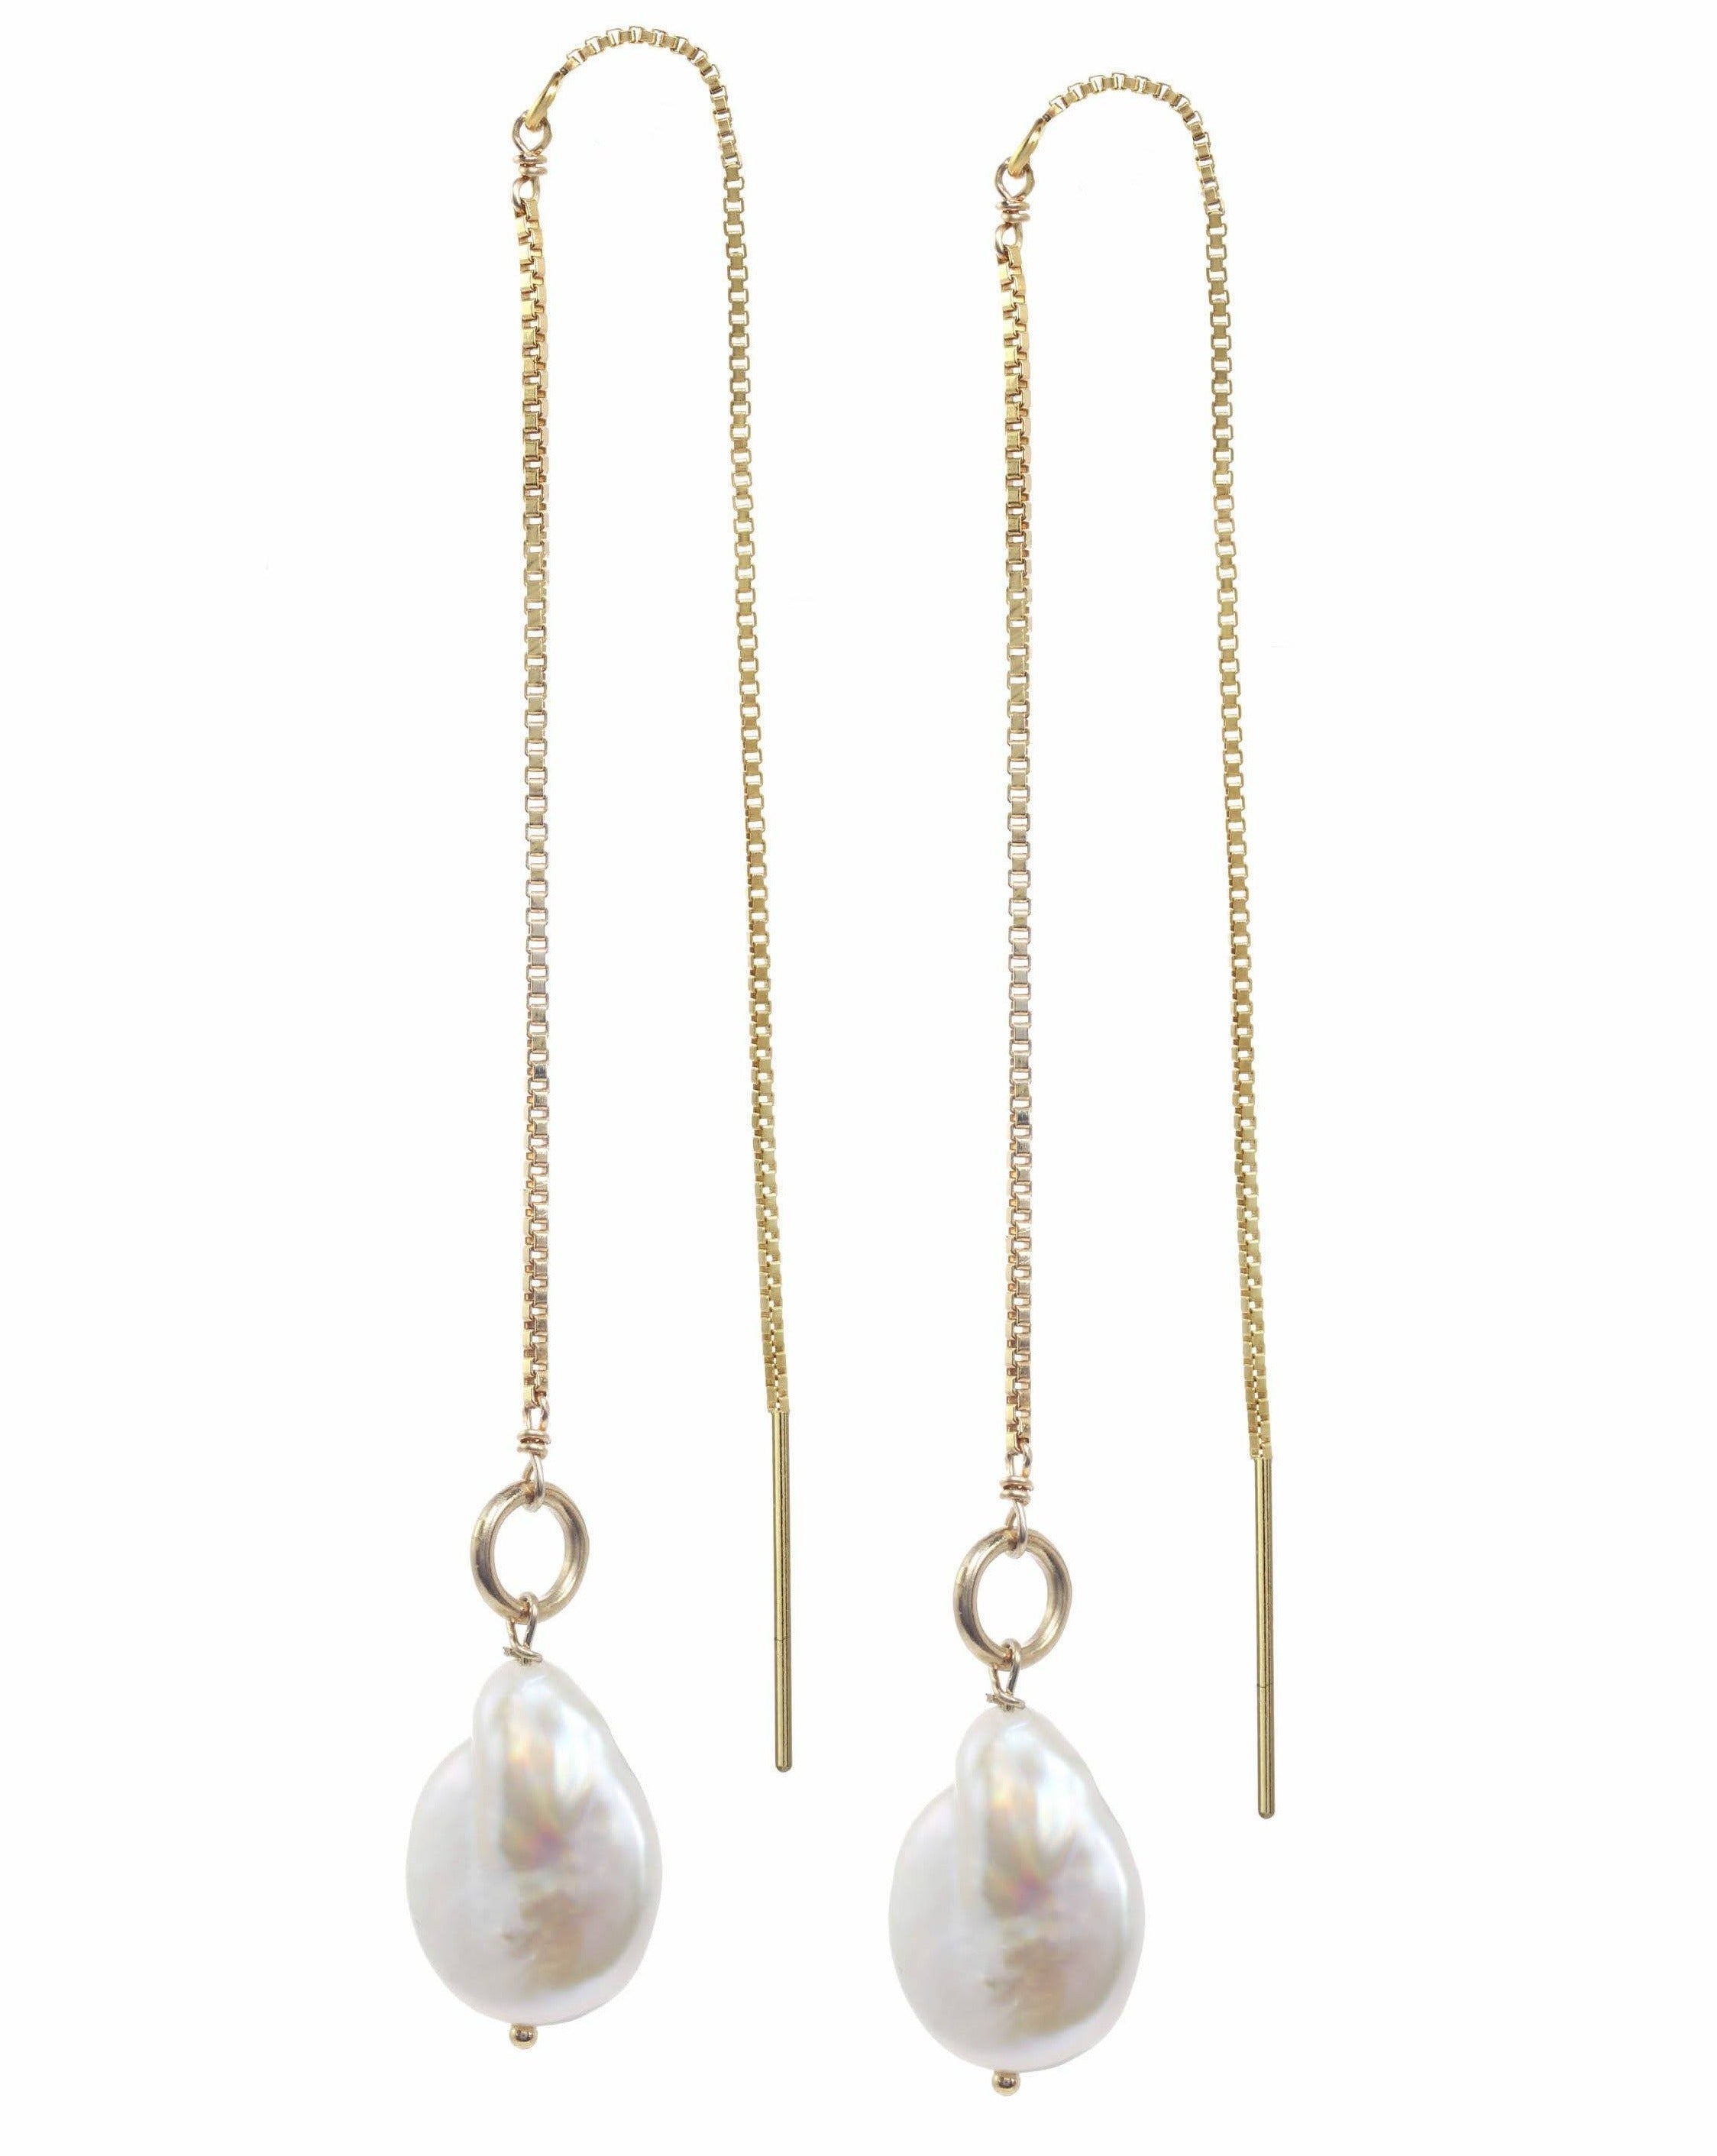 Genesis Threaders by KOZAKH. Threader style earrings with drop length of 2 inches on both sides, crafted in 14K Gold Filled, featuring Baroque Pearls.